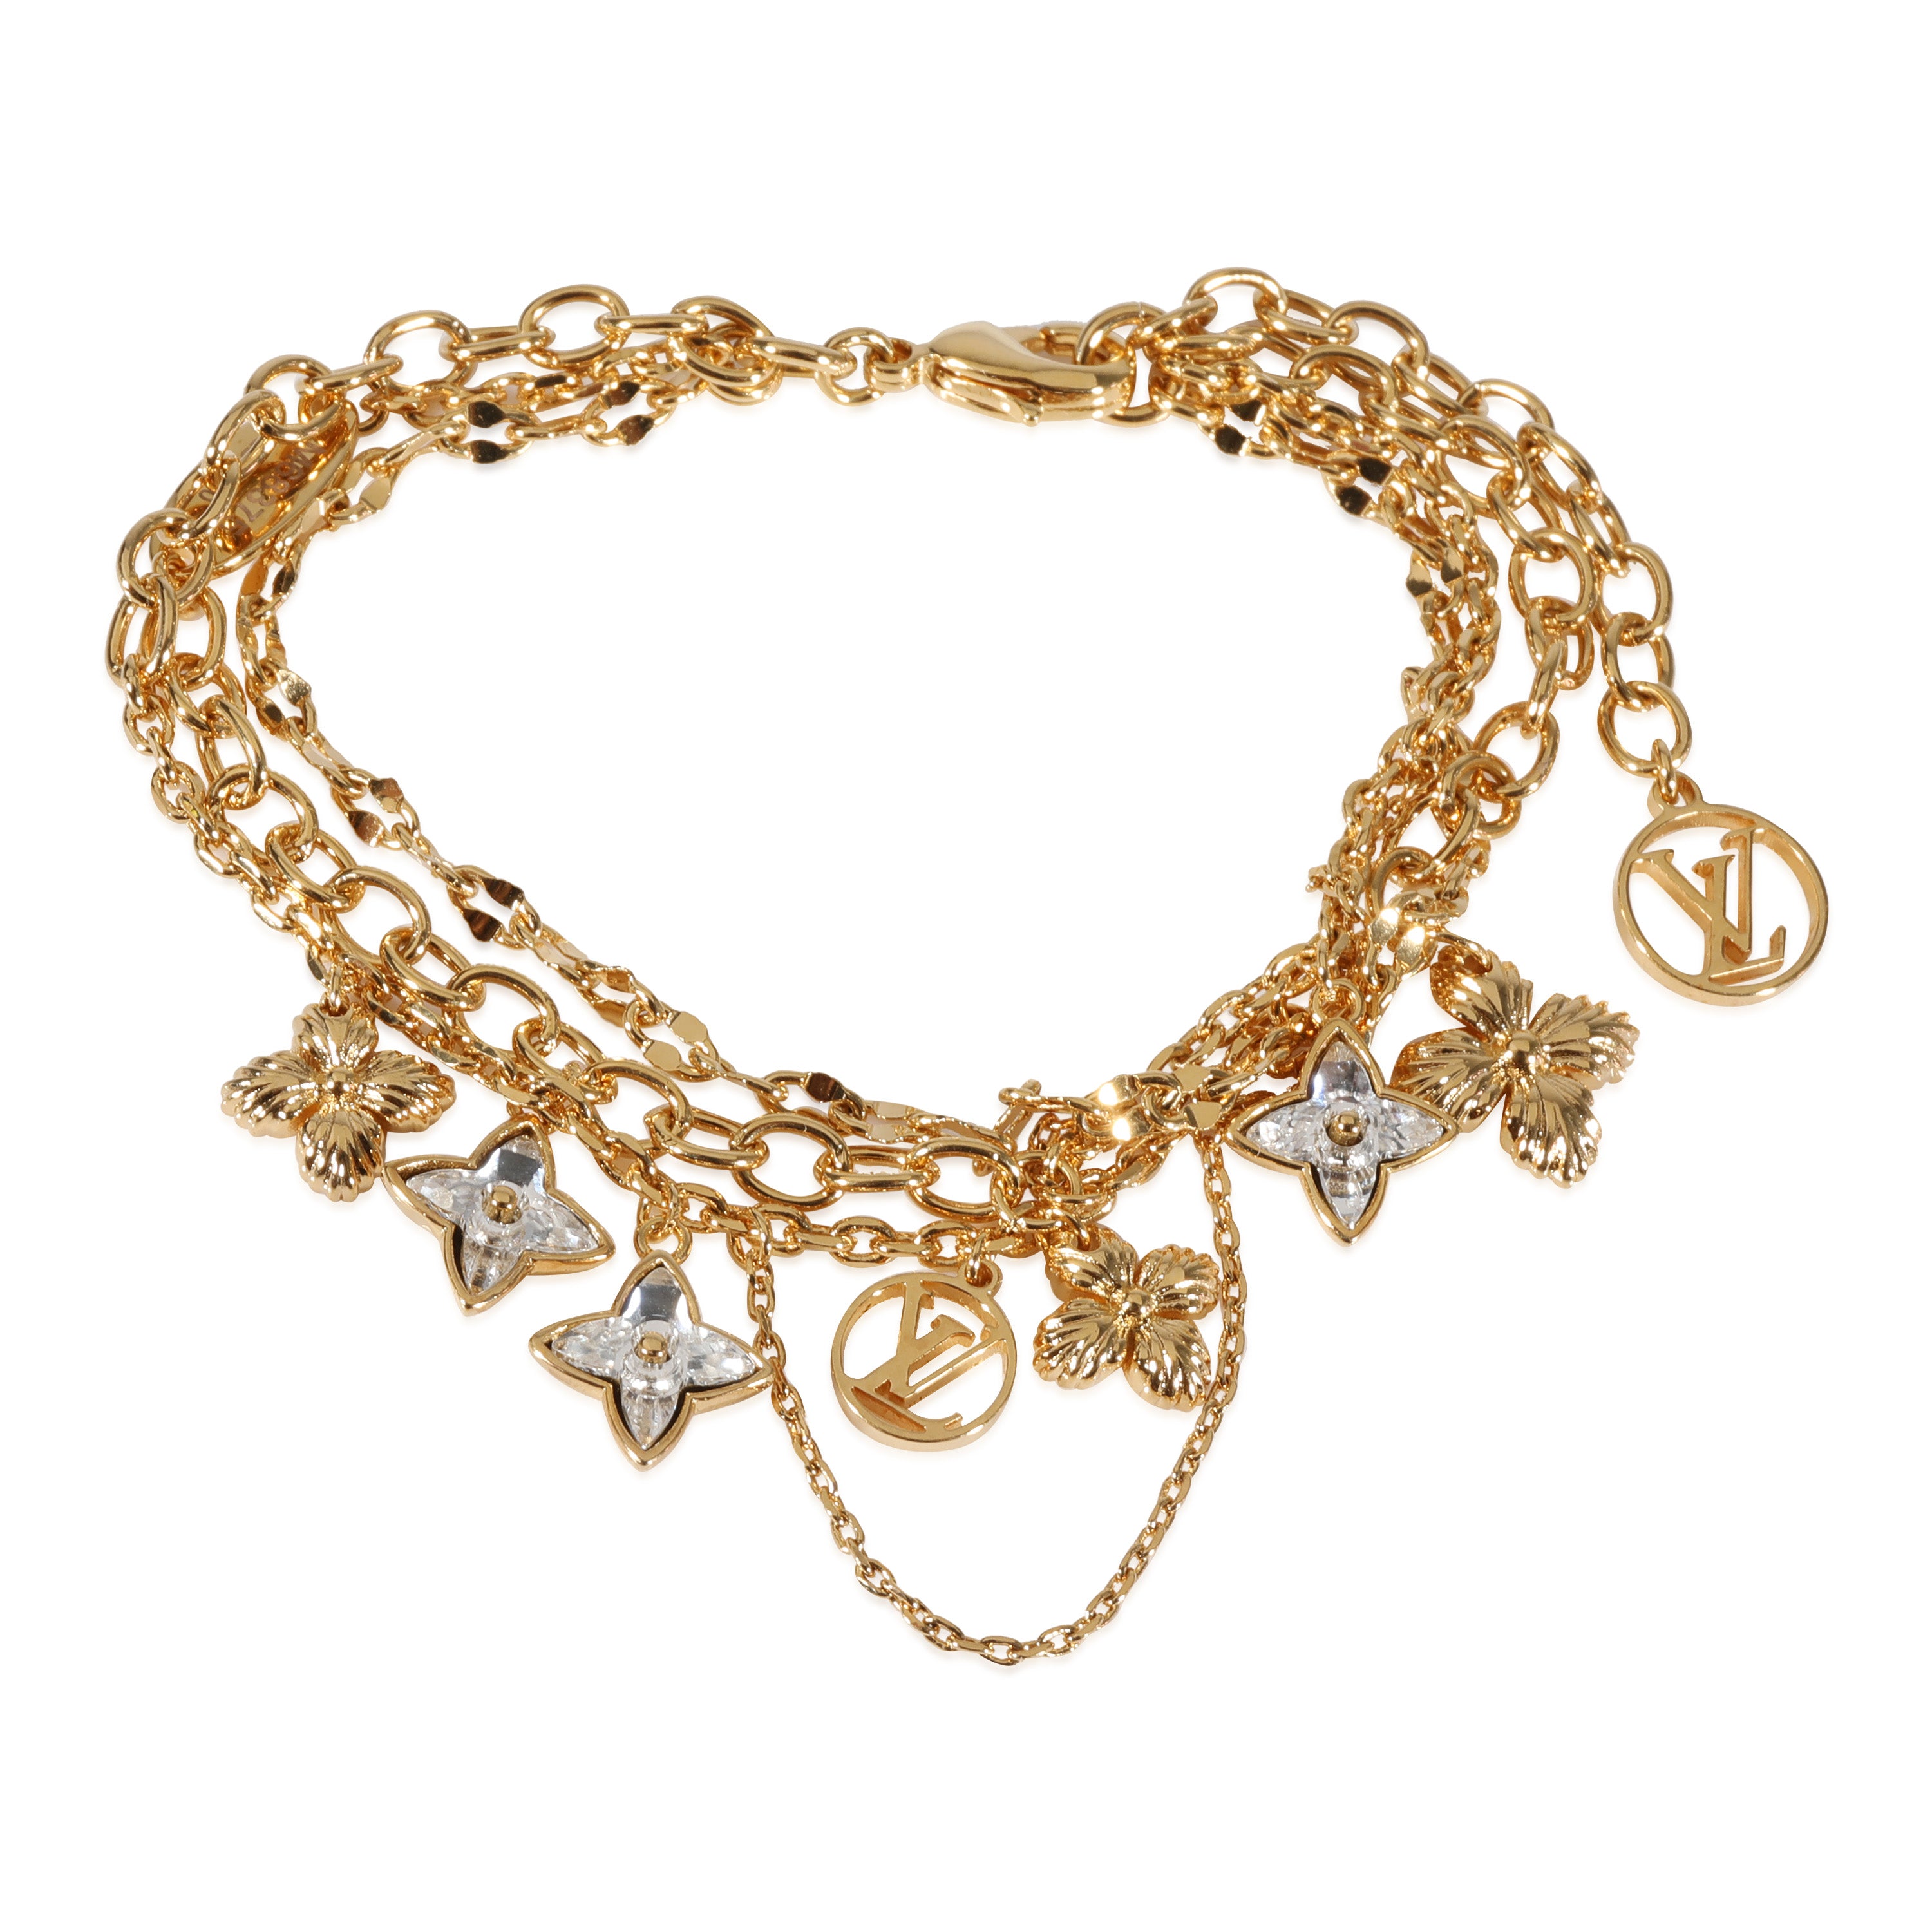 Gold My Blooming Strass Bracelet